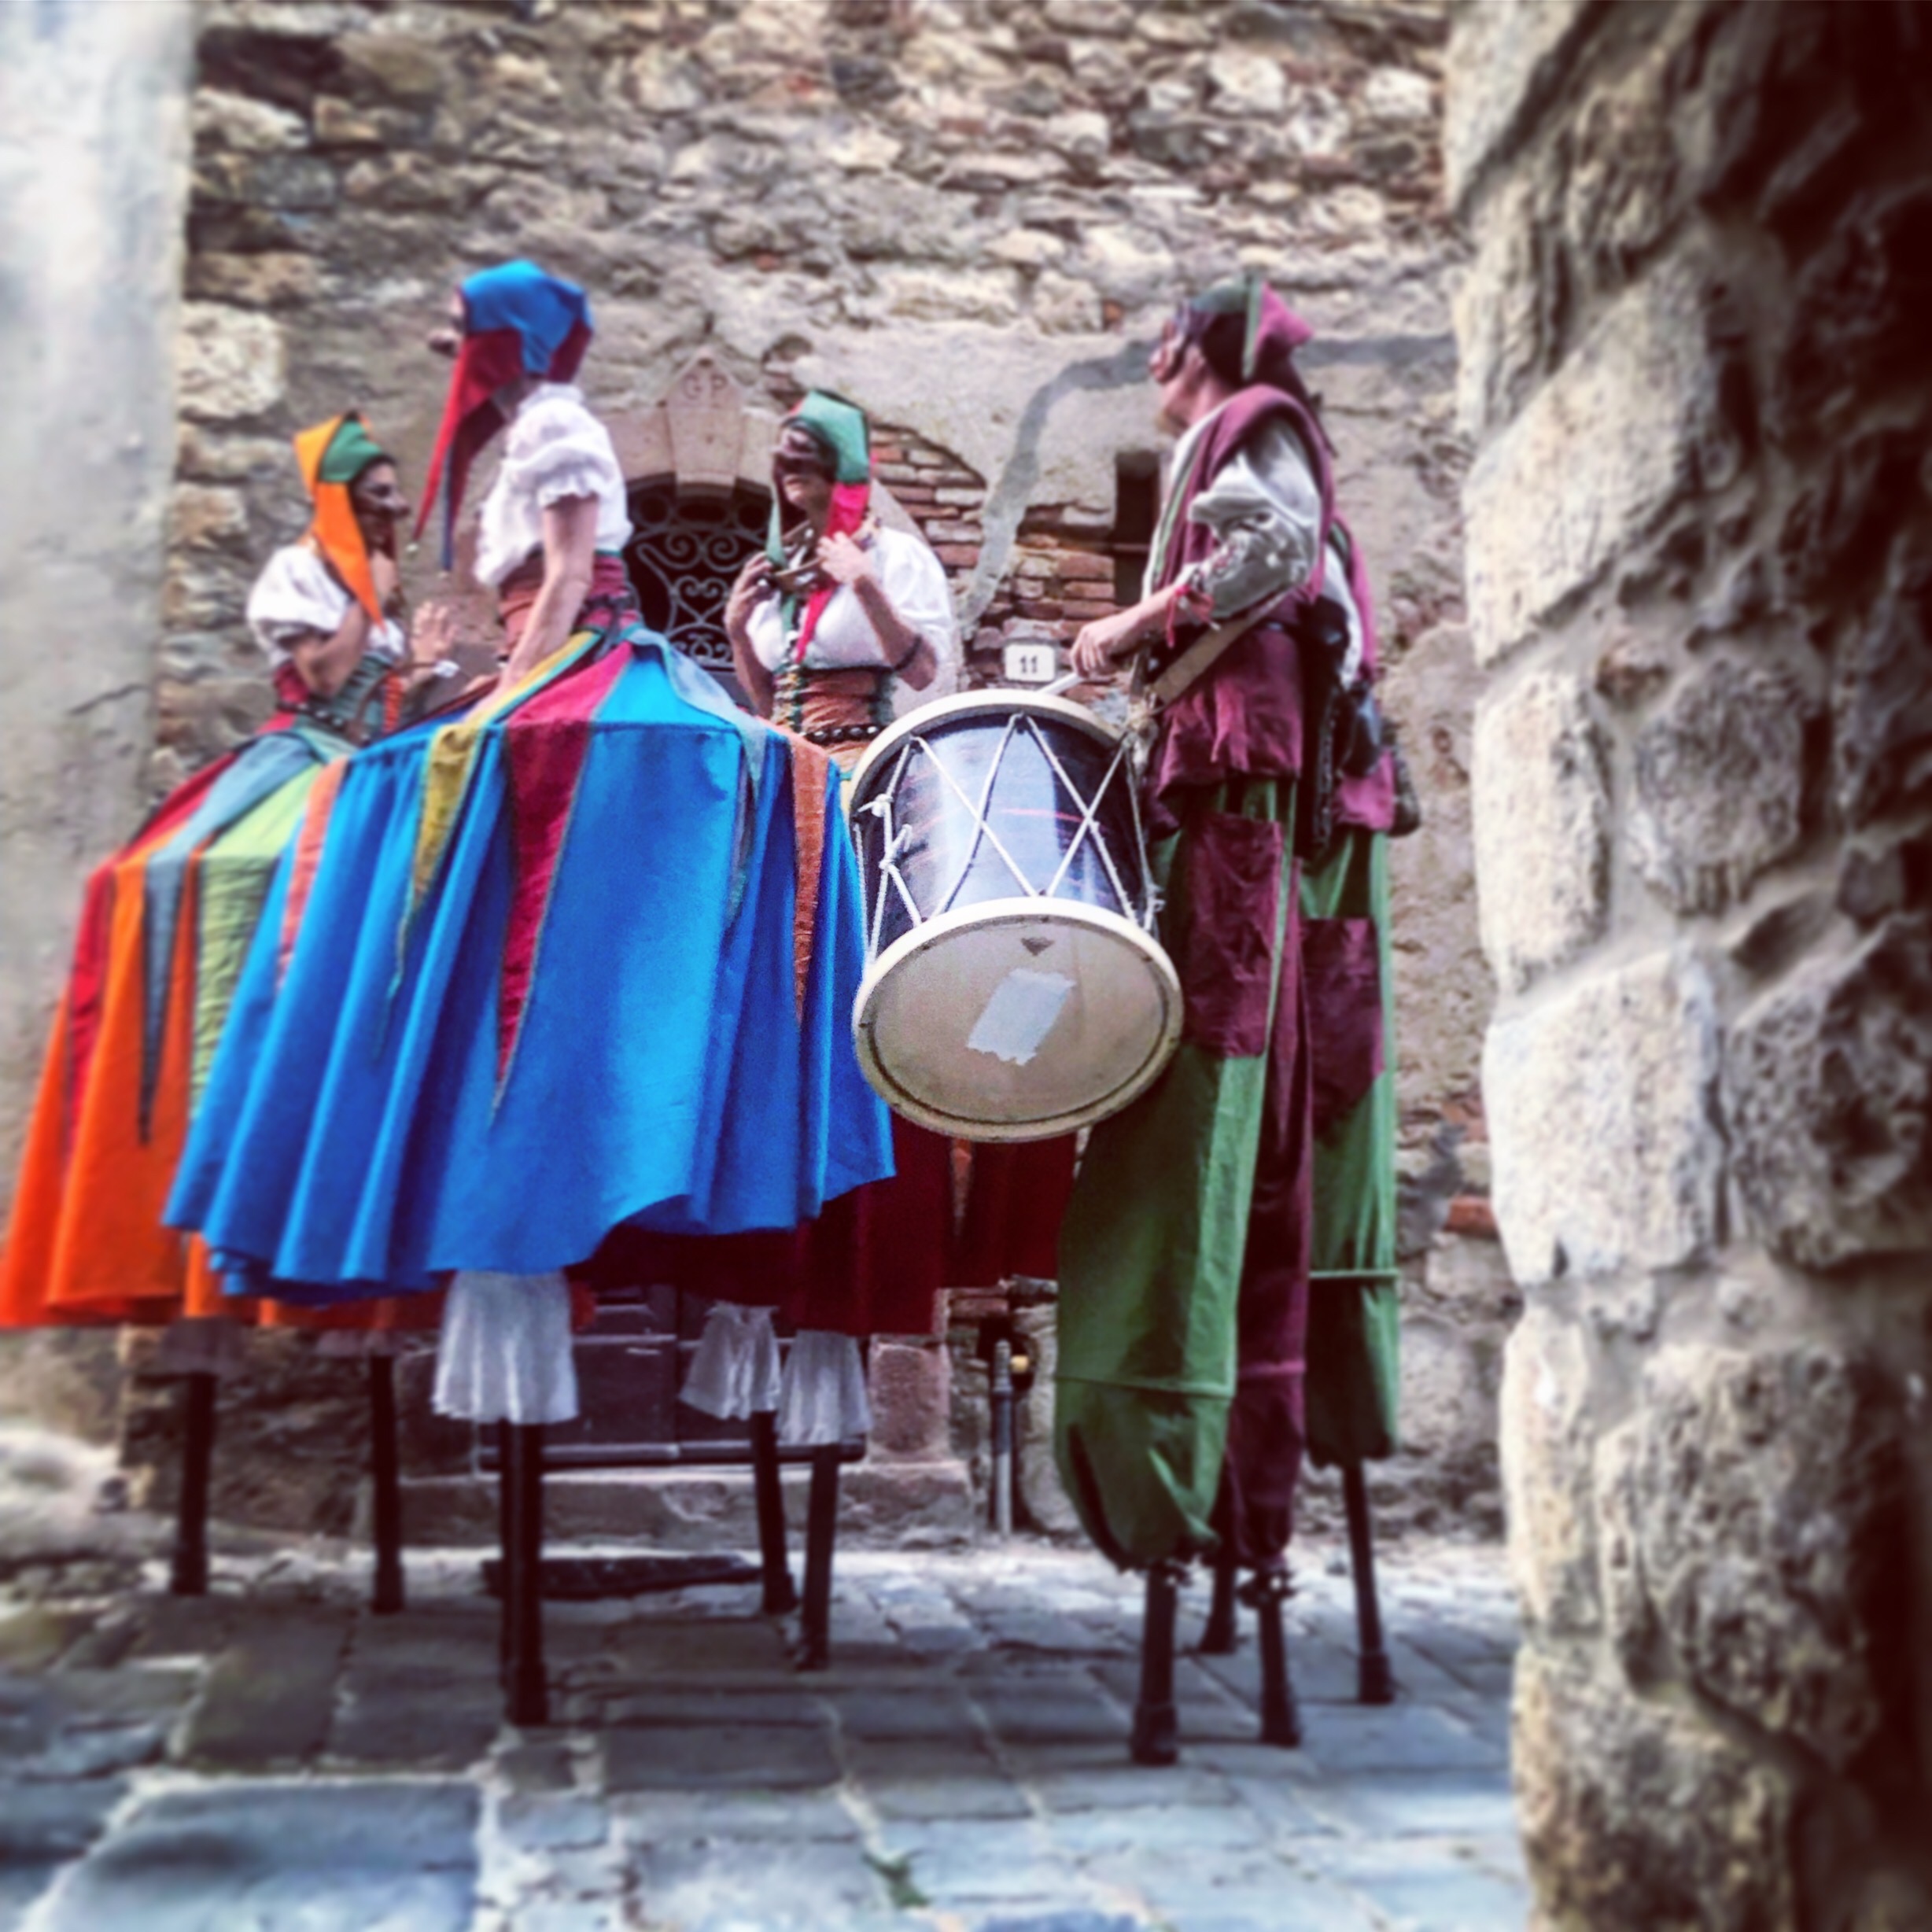 Glimpse of Suvereto during a medieval festival